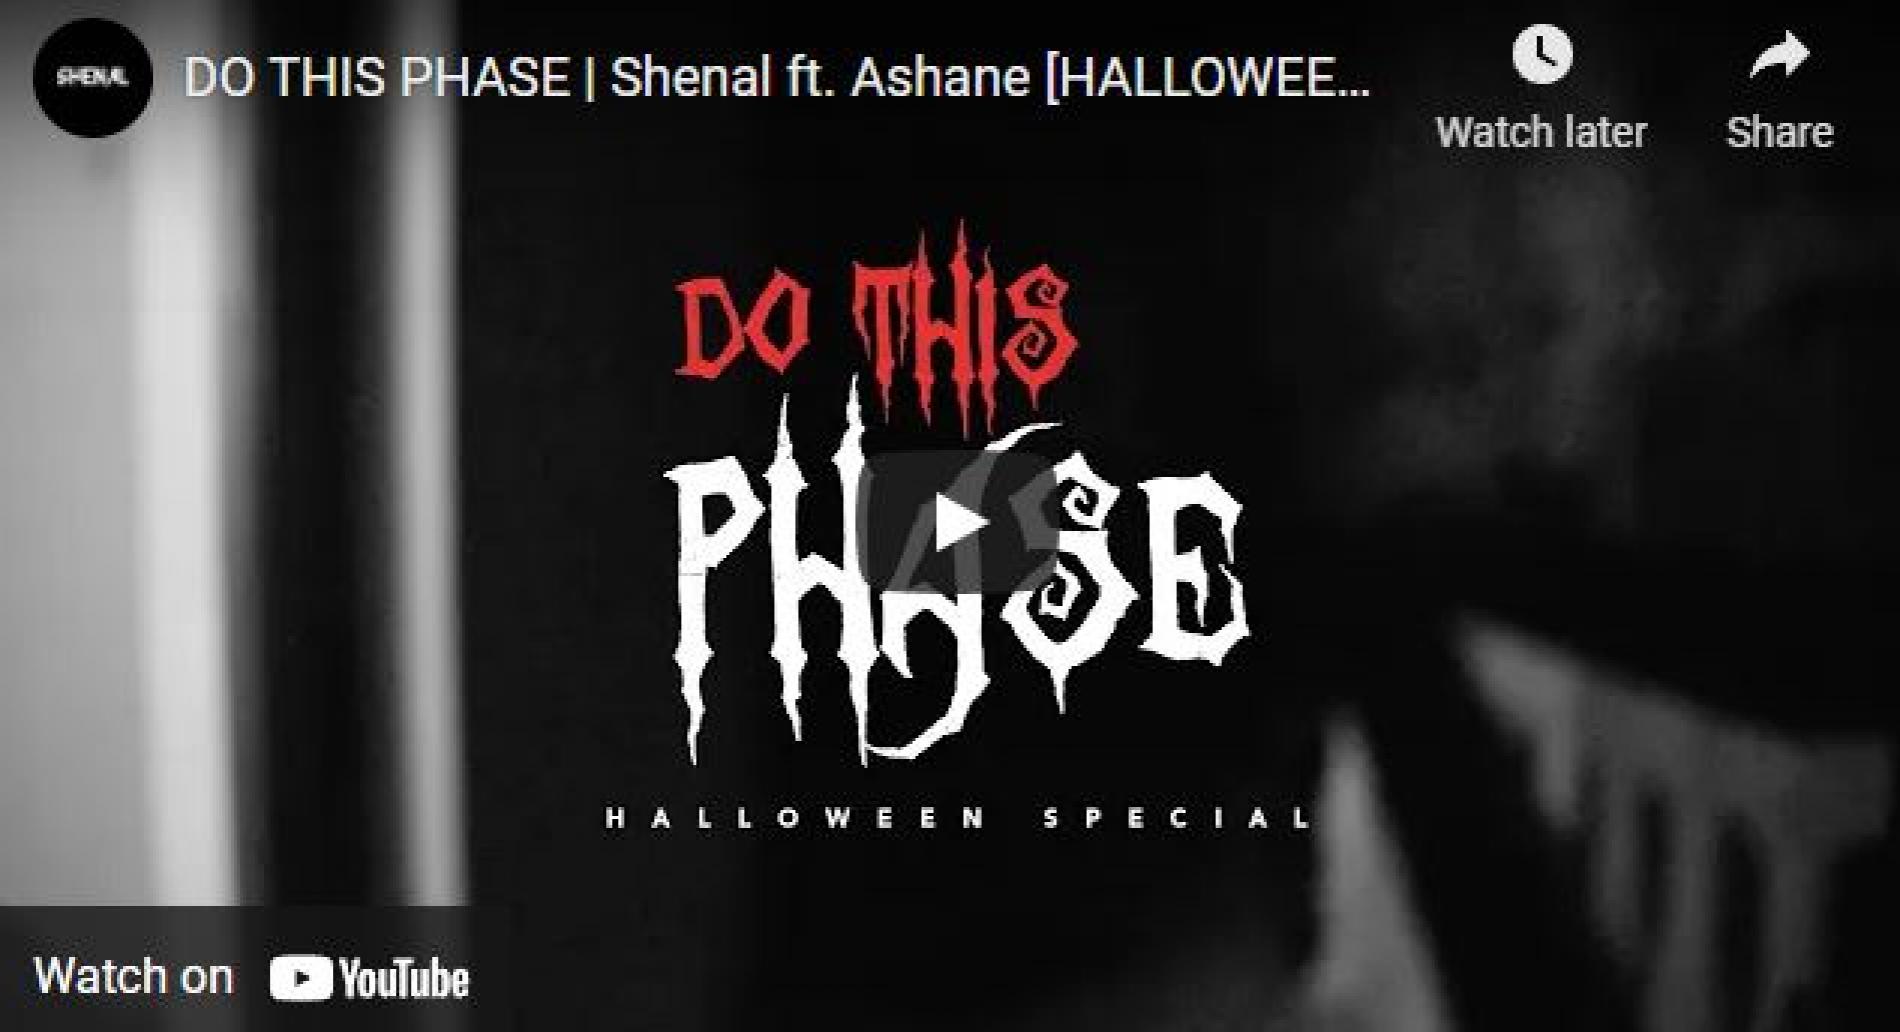 New Music : Do This Phase | Shenal ft Ashane [Halloween Special] 🎃